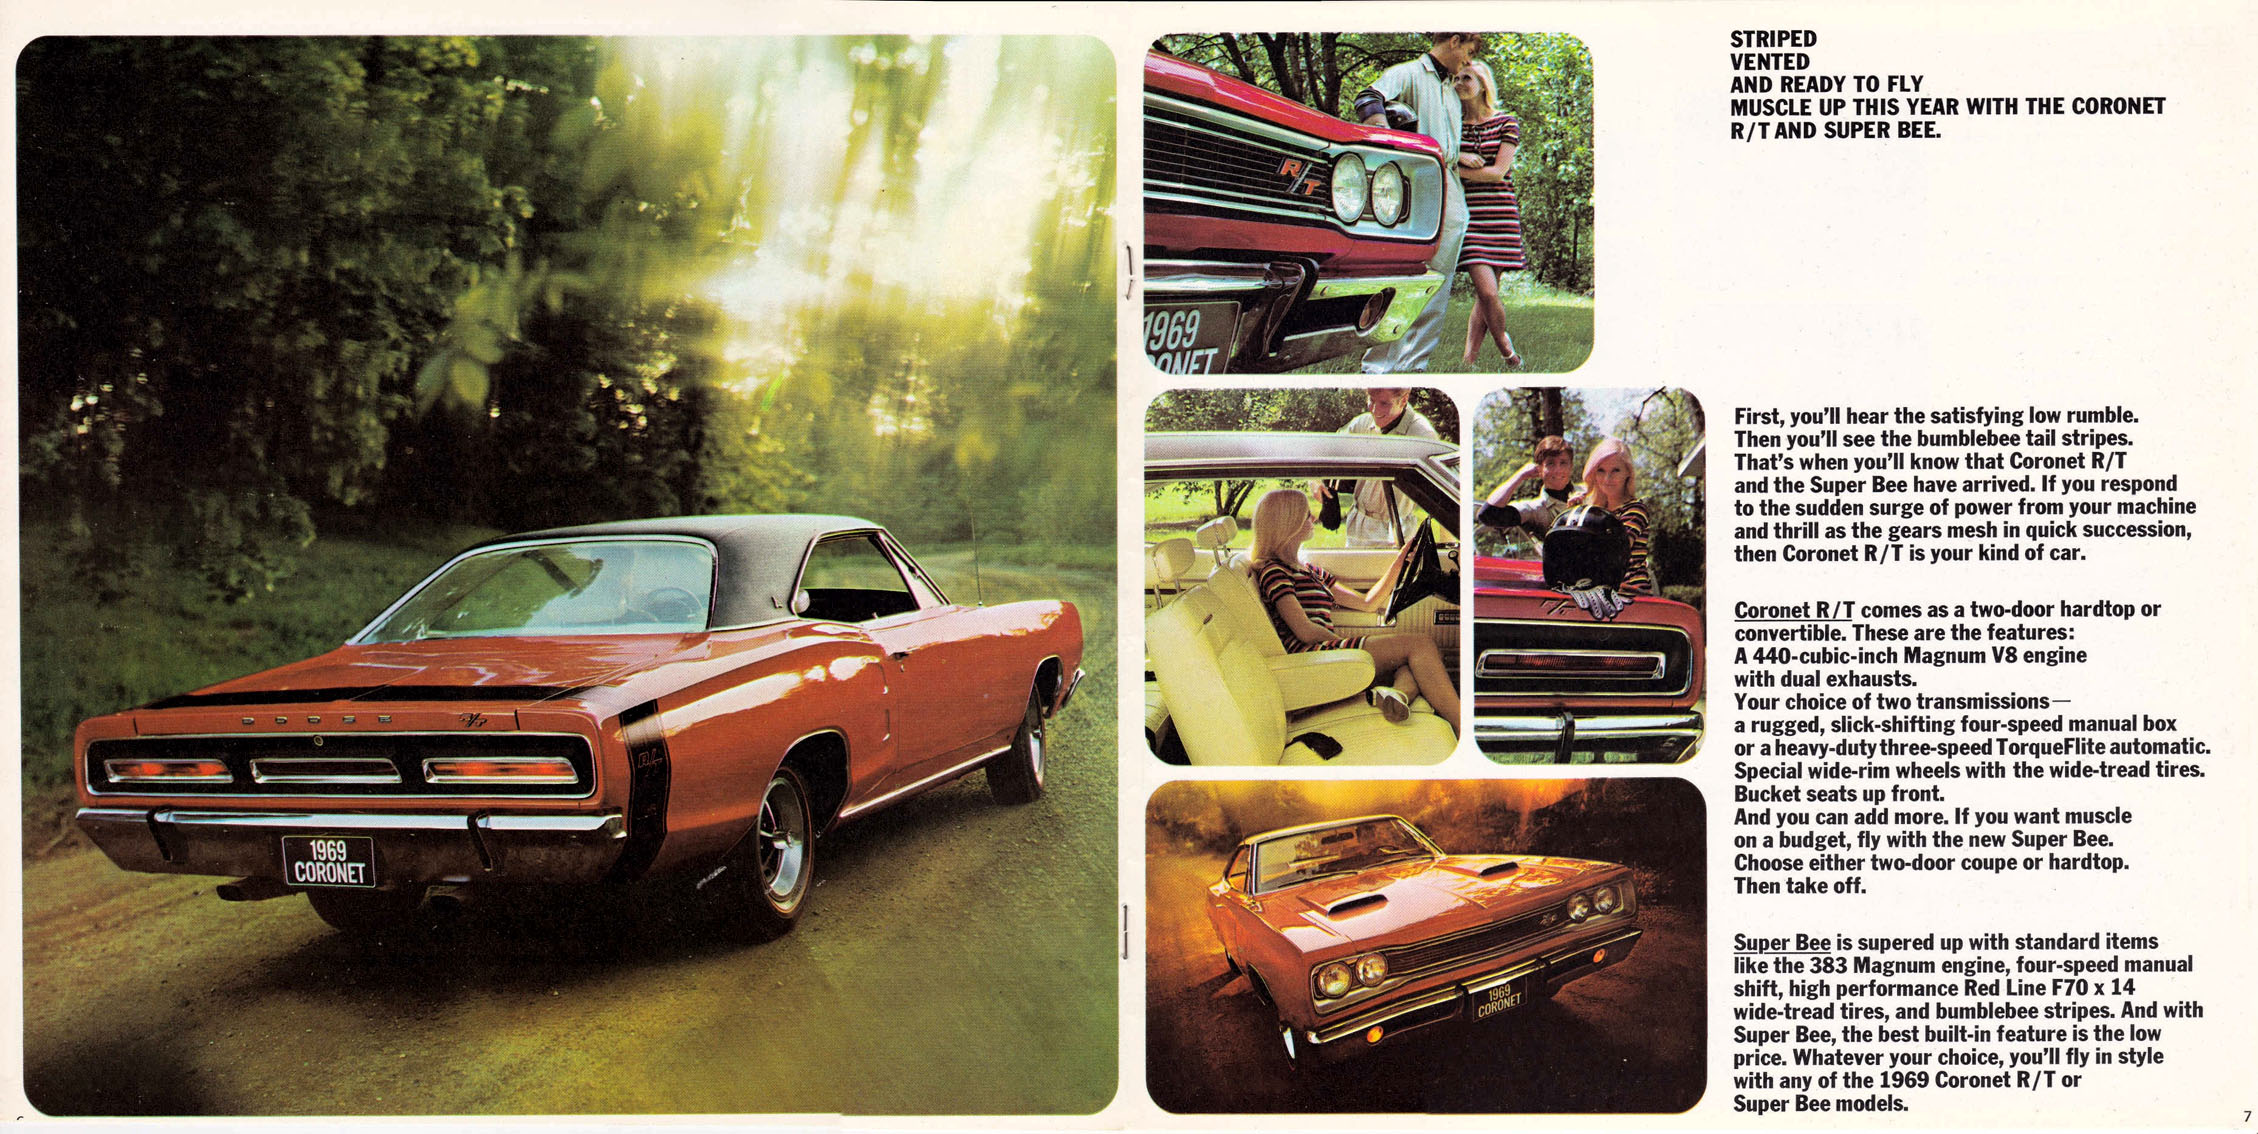 1969 Dodge Coronet Advertisement – “Striped, vented and ready to fly”